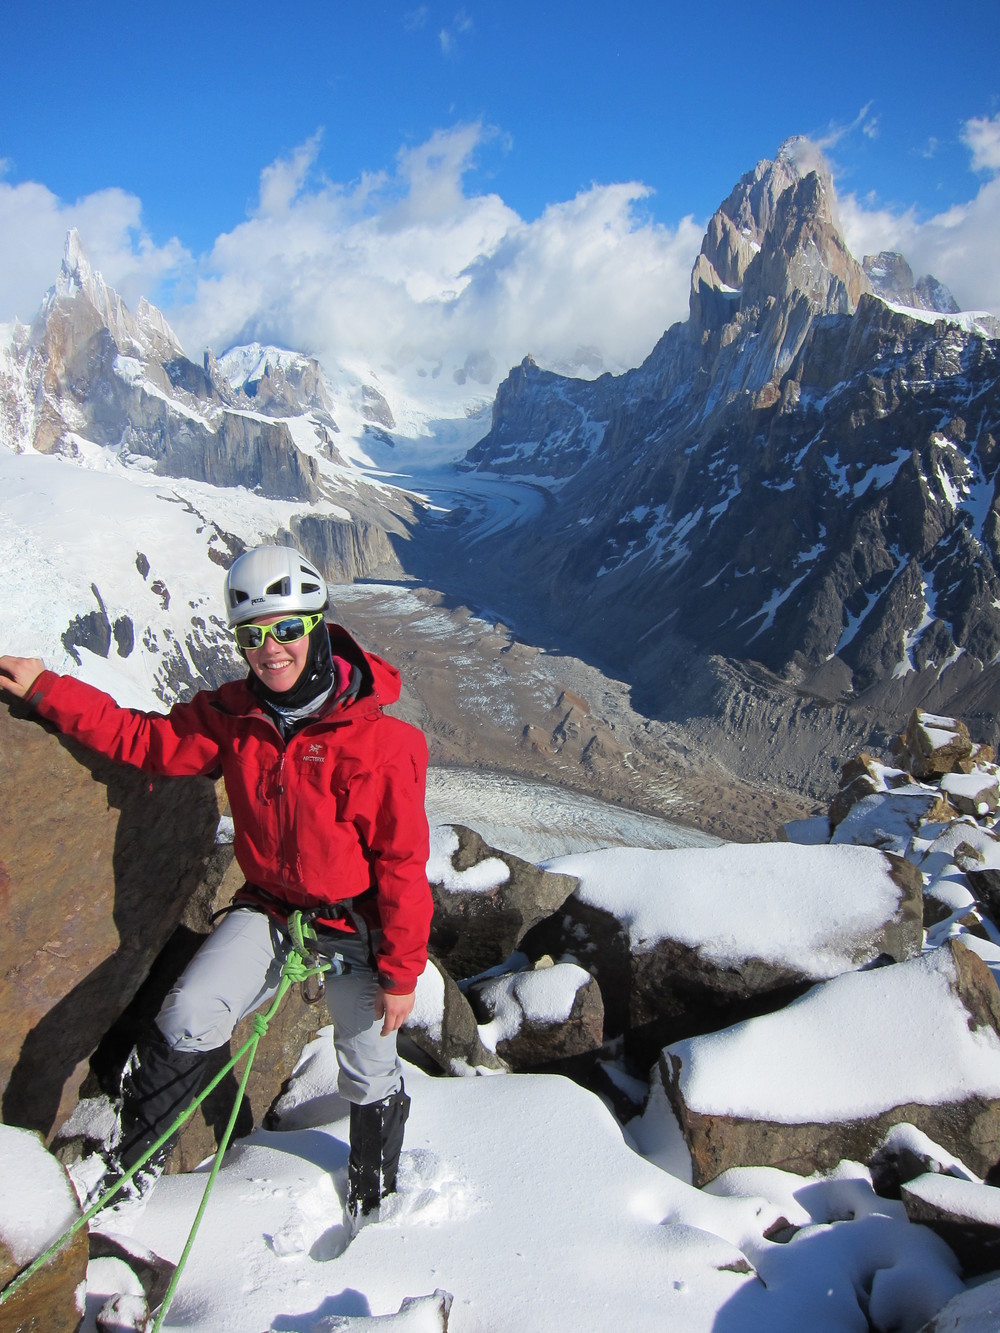 En route the summit of Cerro Solo with Cerro Torre and Fitz Roy in the background. 